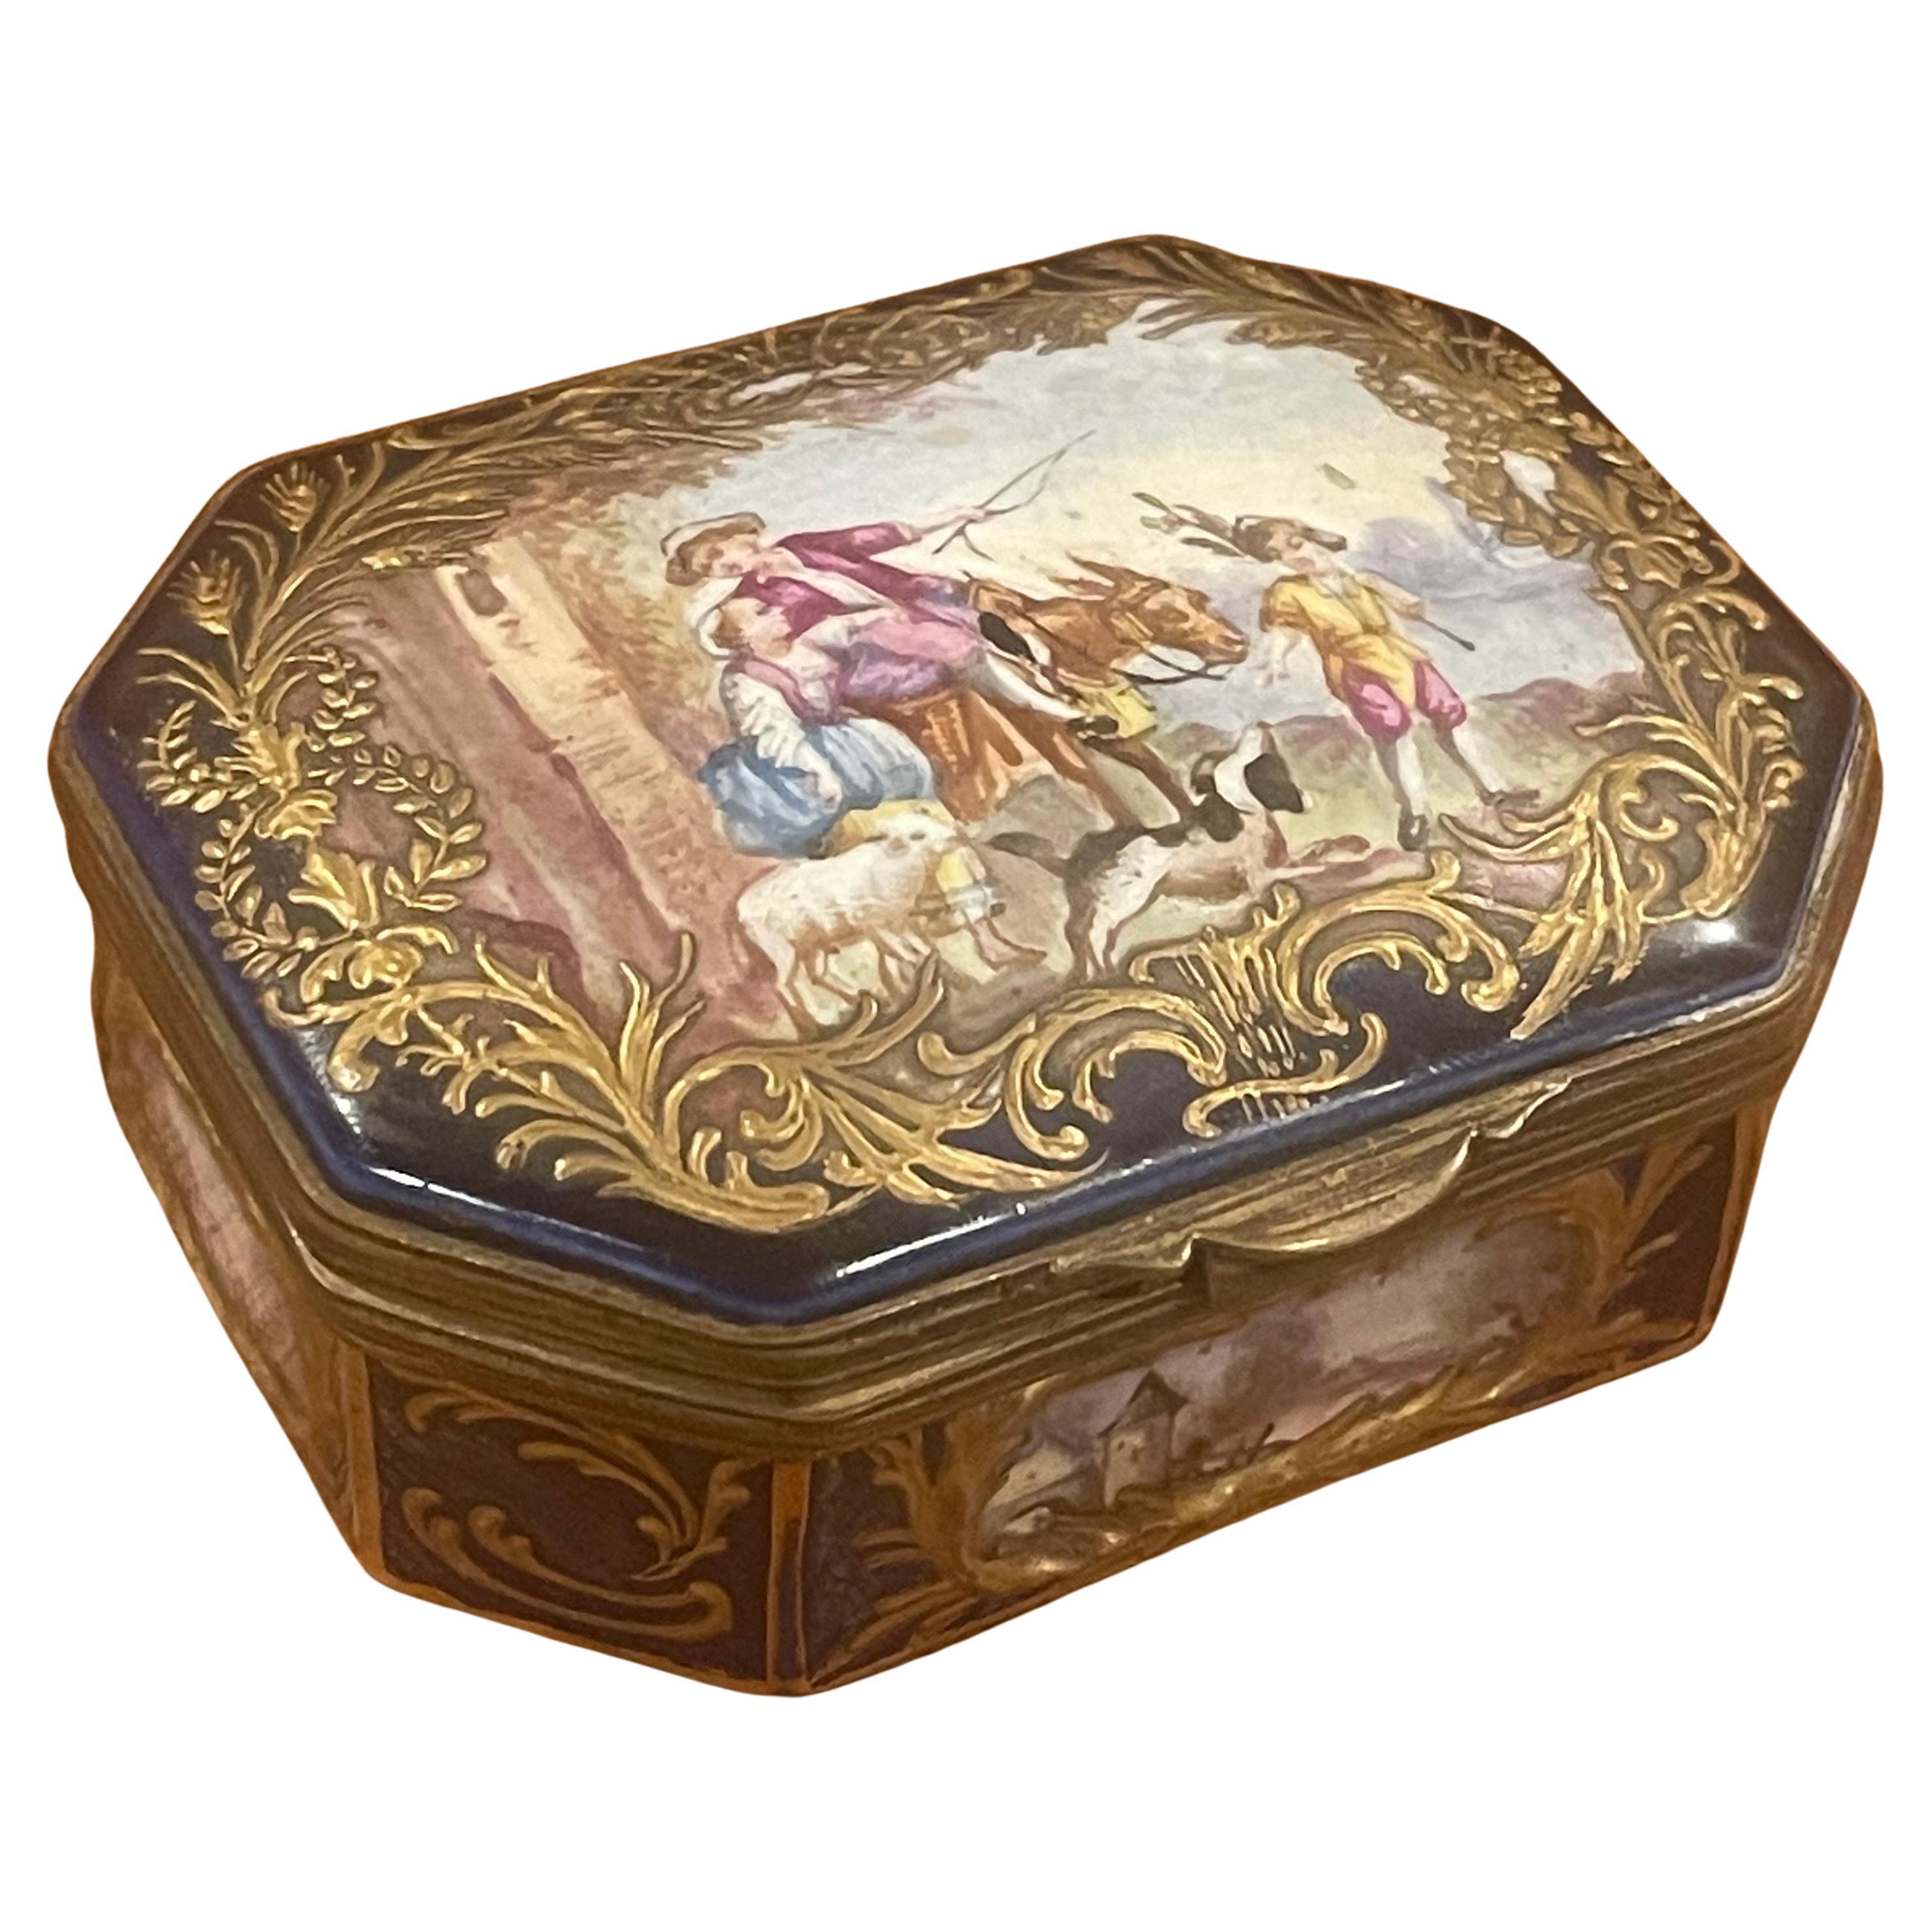 18th Century Victorian Enamel and Ormulu Lidded Box by Sevres